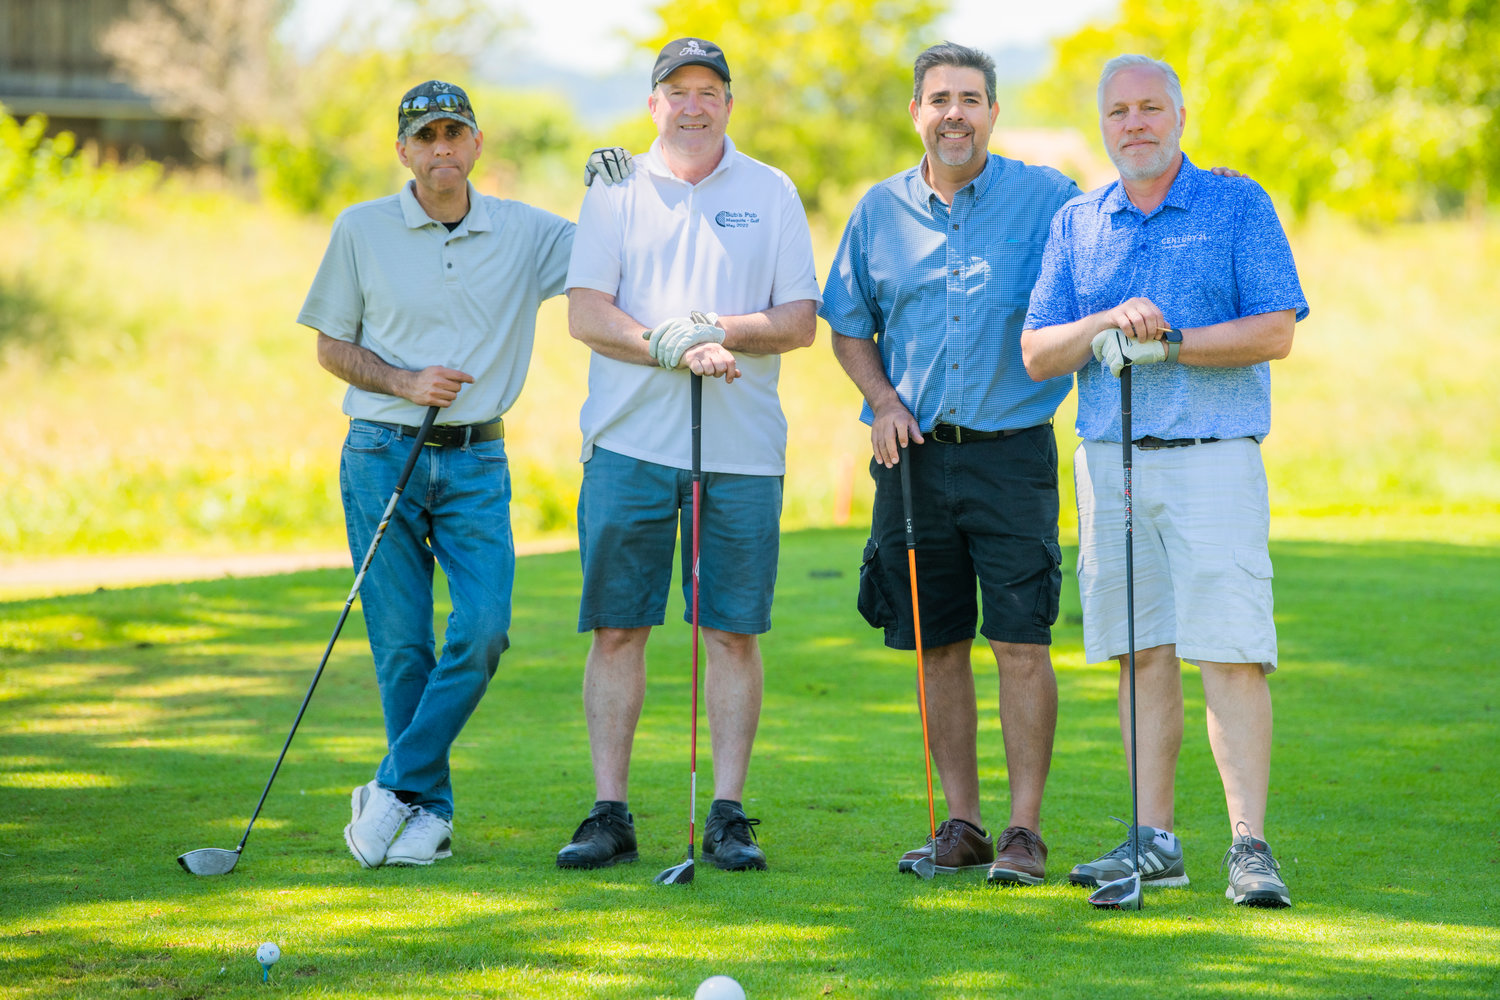 The Century 21 Lund Realtors team poses for a photo Friday in Chehalis during a charity golf tournament raising money for the Hope Alliance.